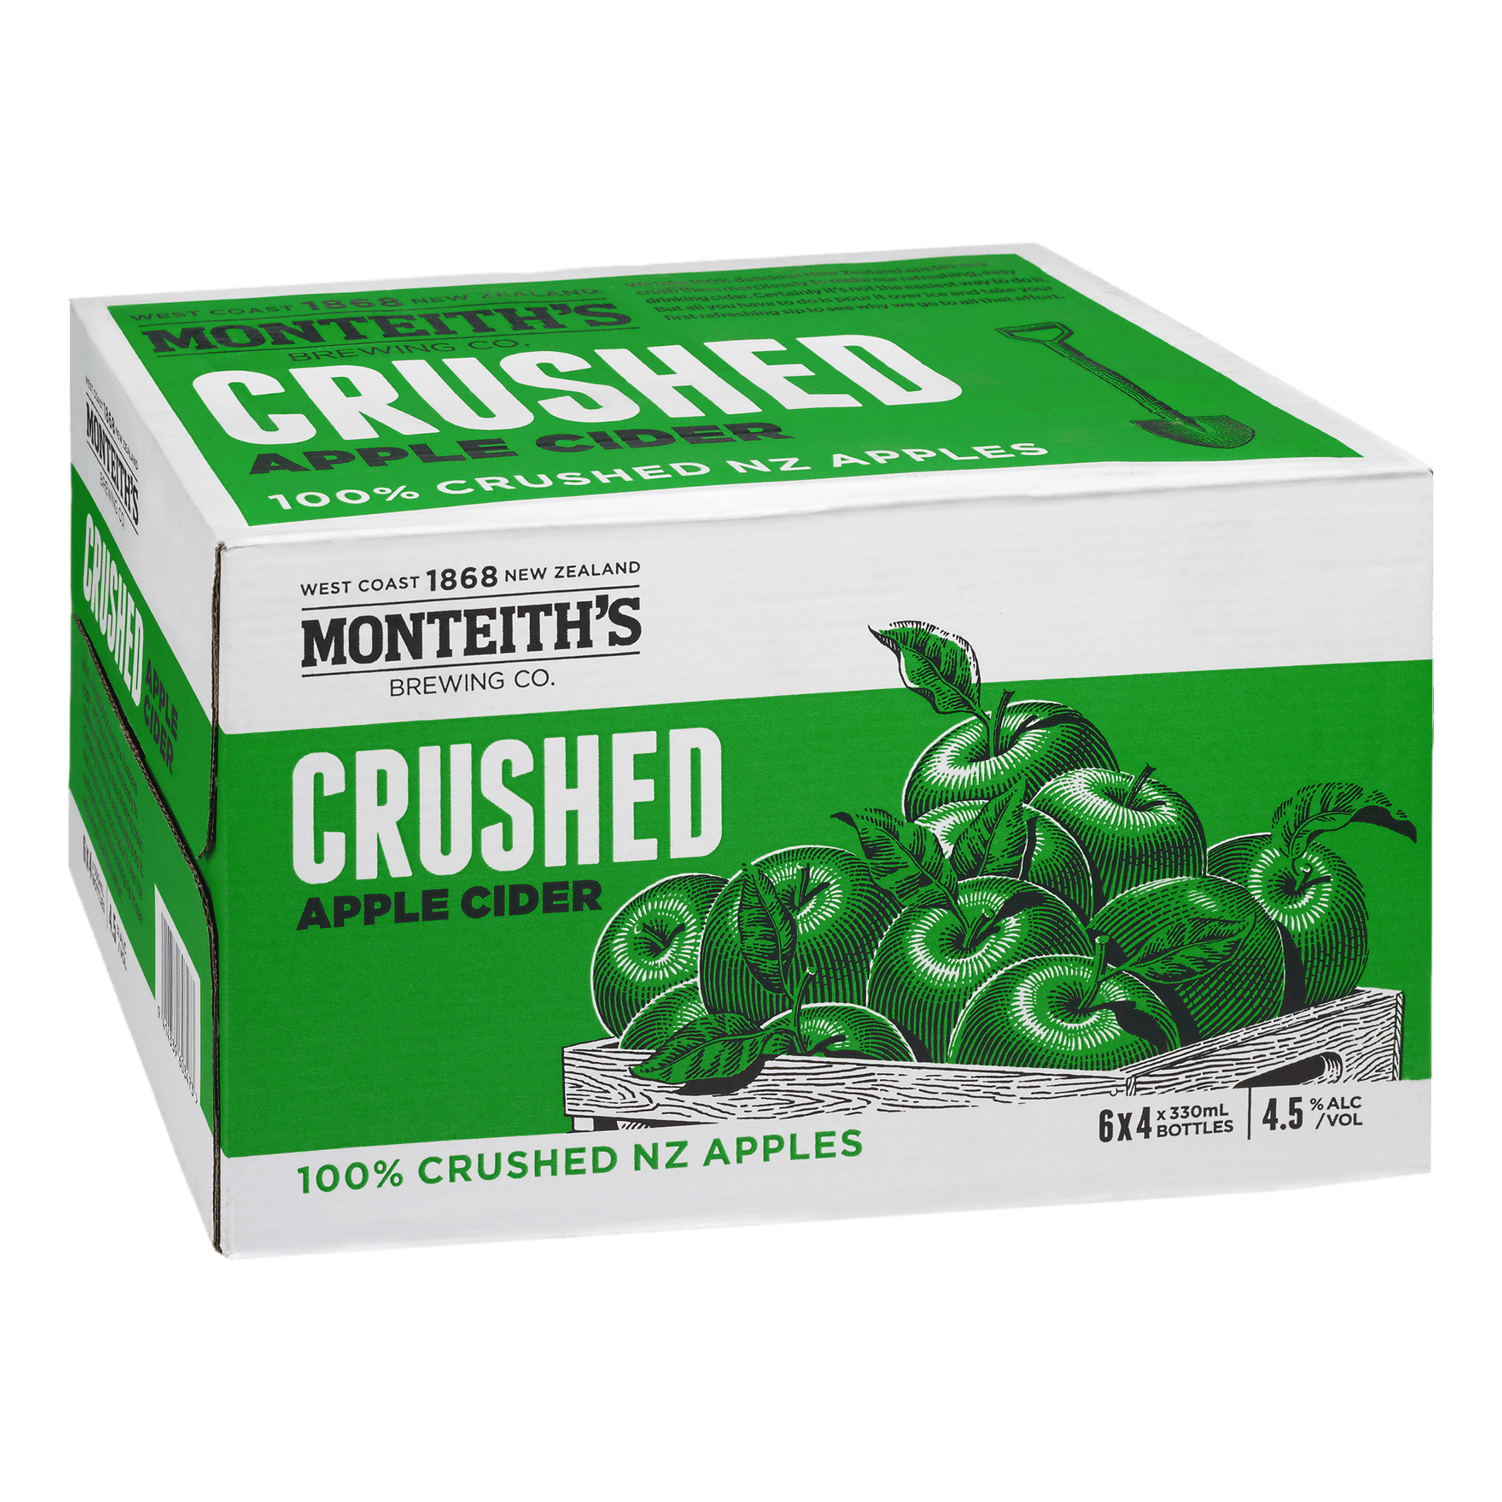 Monteith's Crushed Apple Cider 330ml Bottle Case of 24